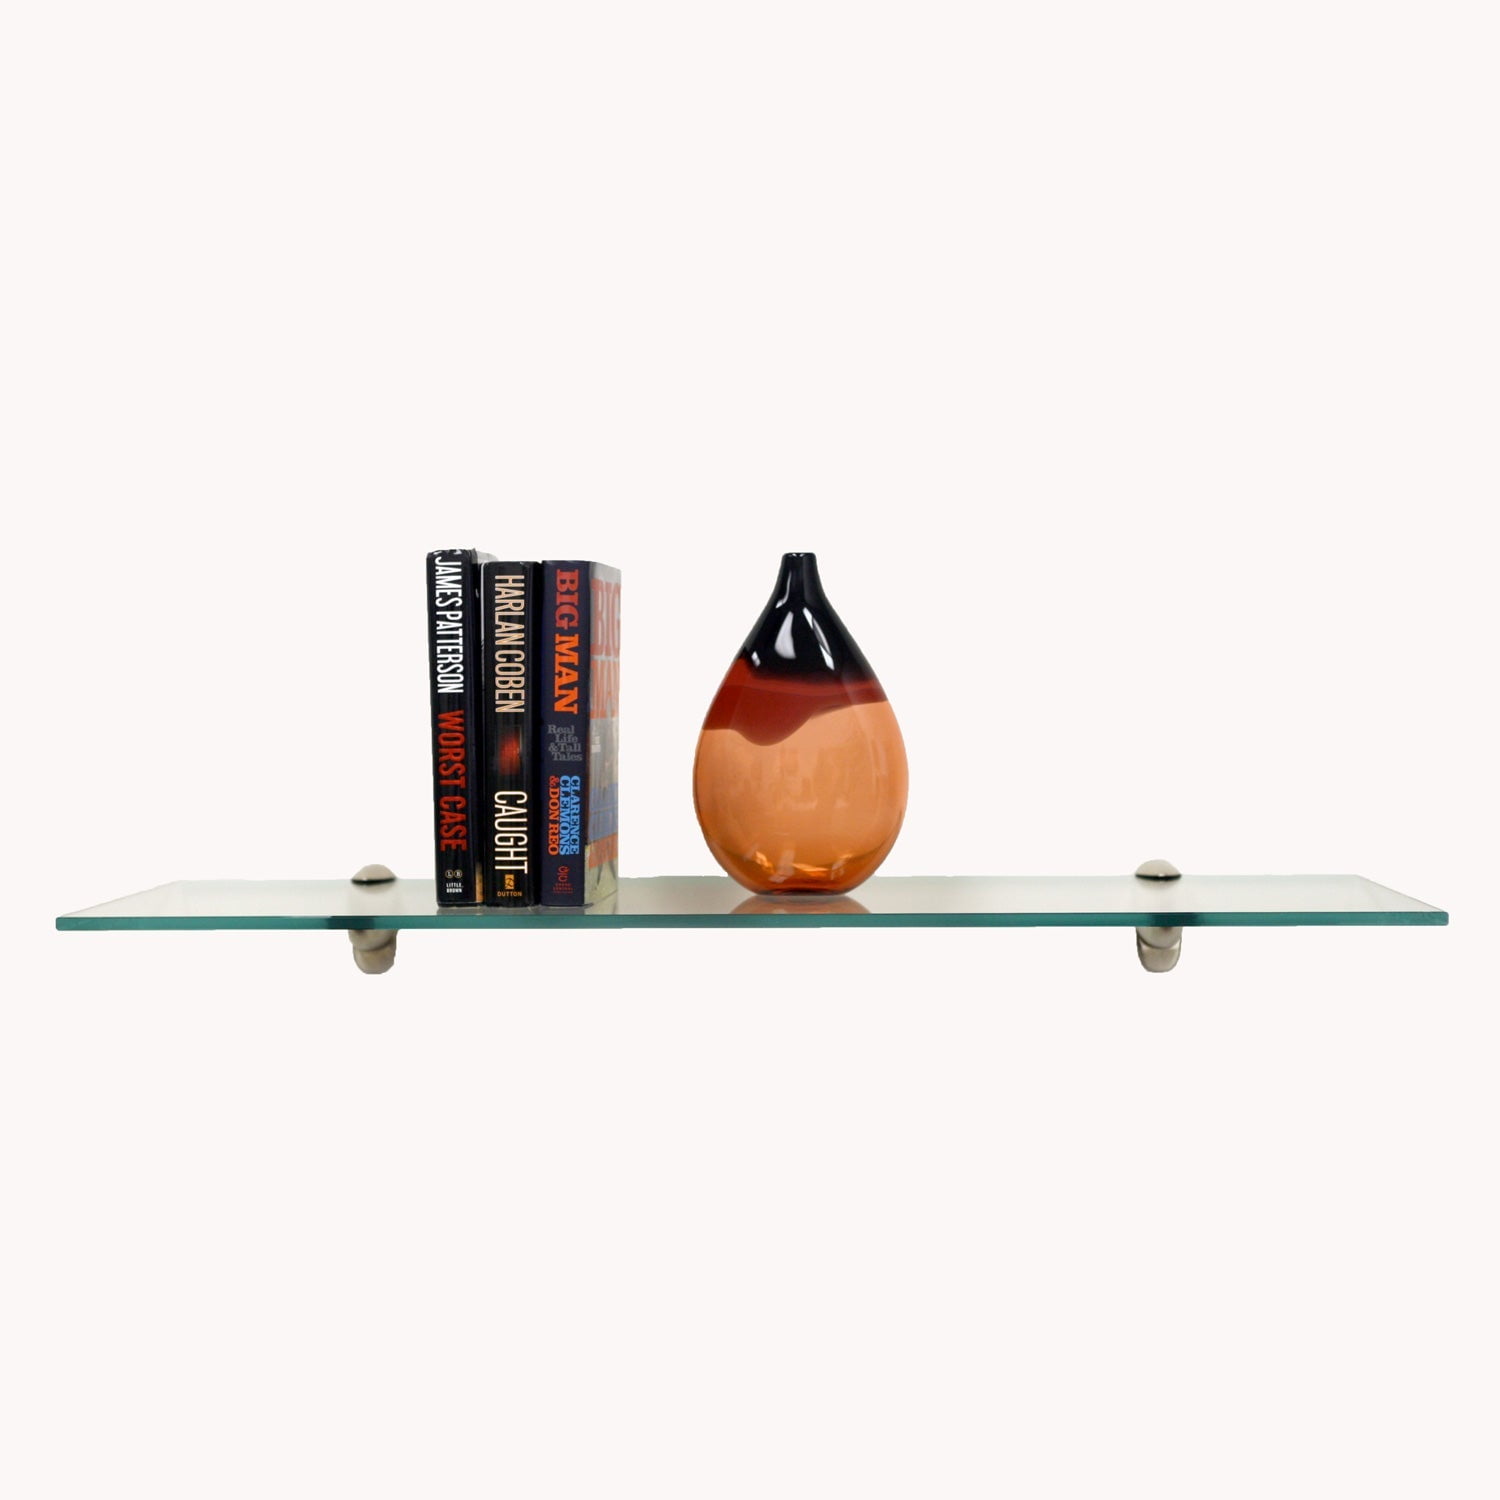 3/4" X 24" Heron Floating Glass Shelves Brackets Included with Each Shelf  By Spancraft Glass